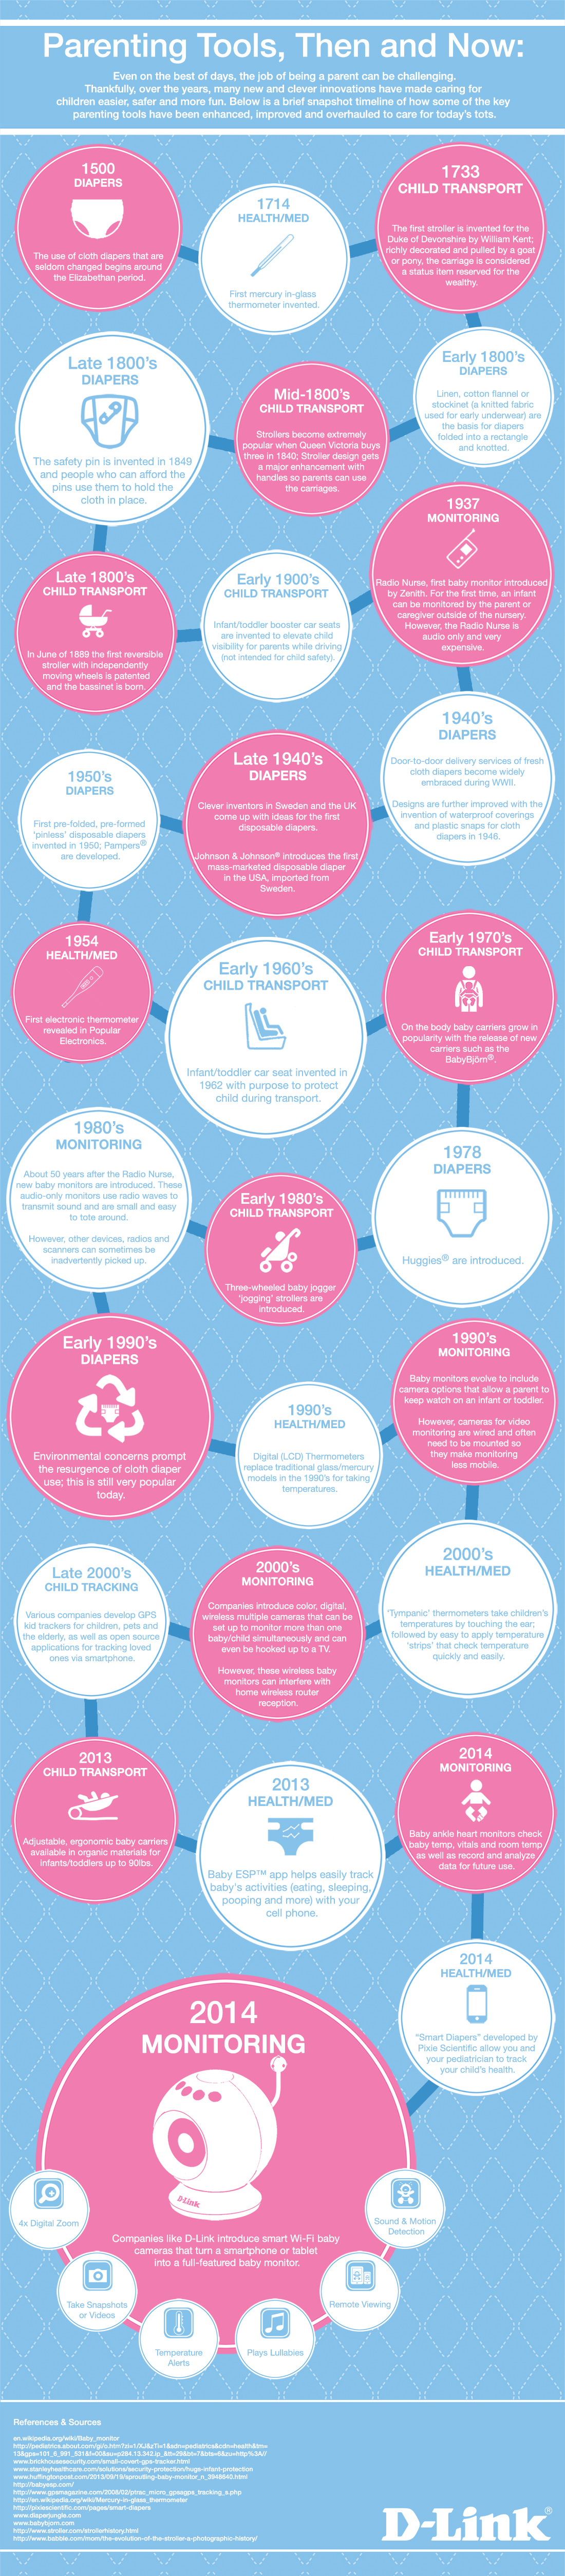 dlink baby camera parenting tools infographic